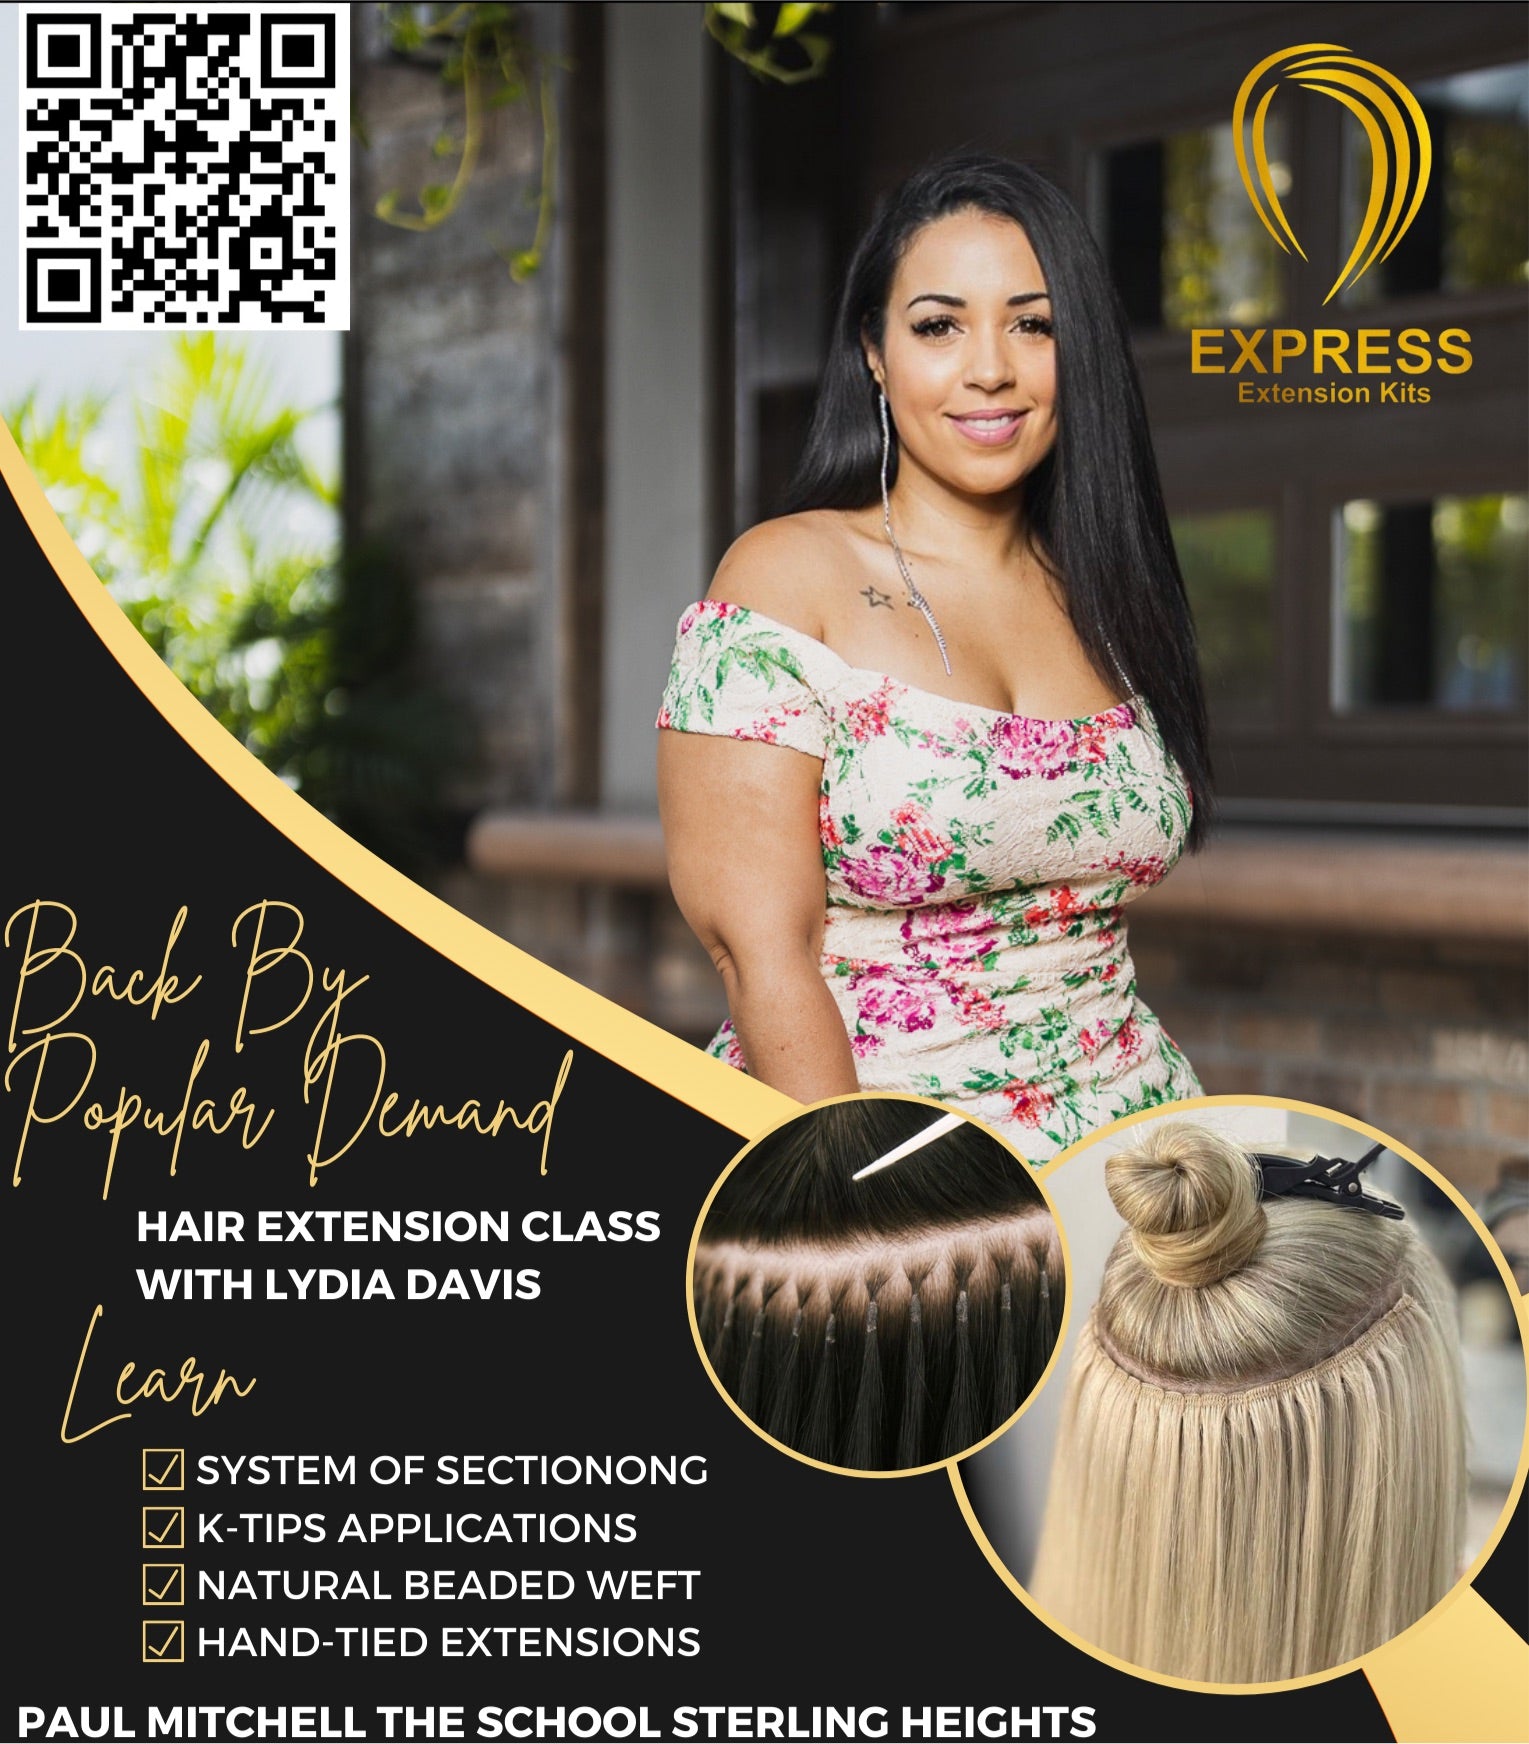 Express Hair Extensions tool kit created by Lydia Davis